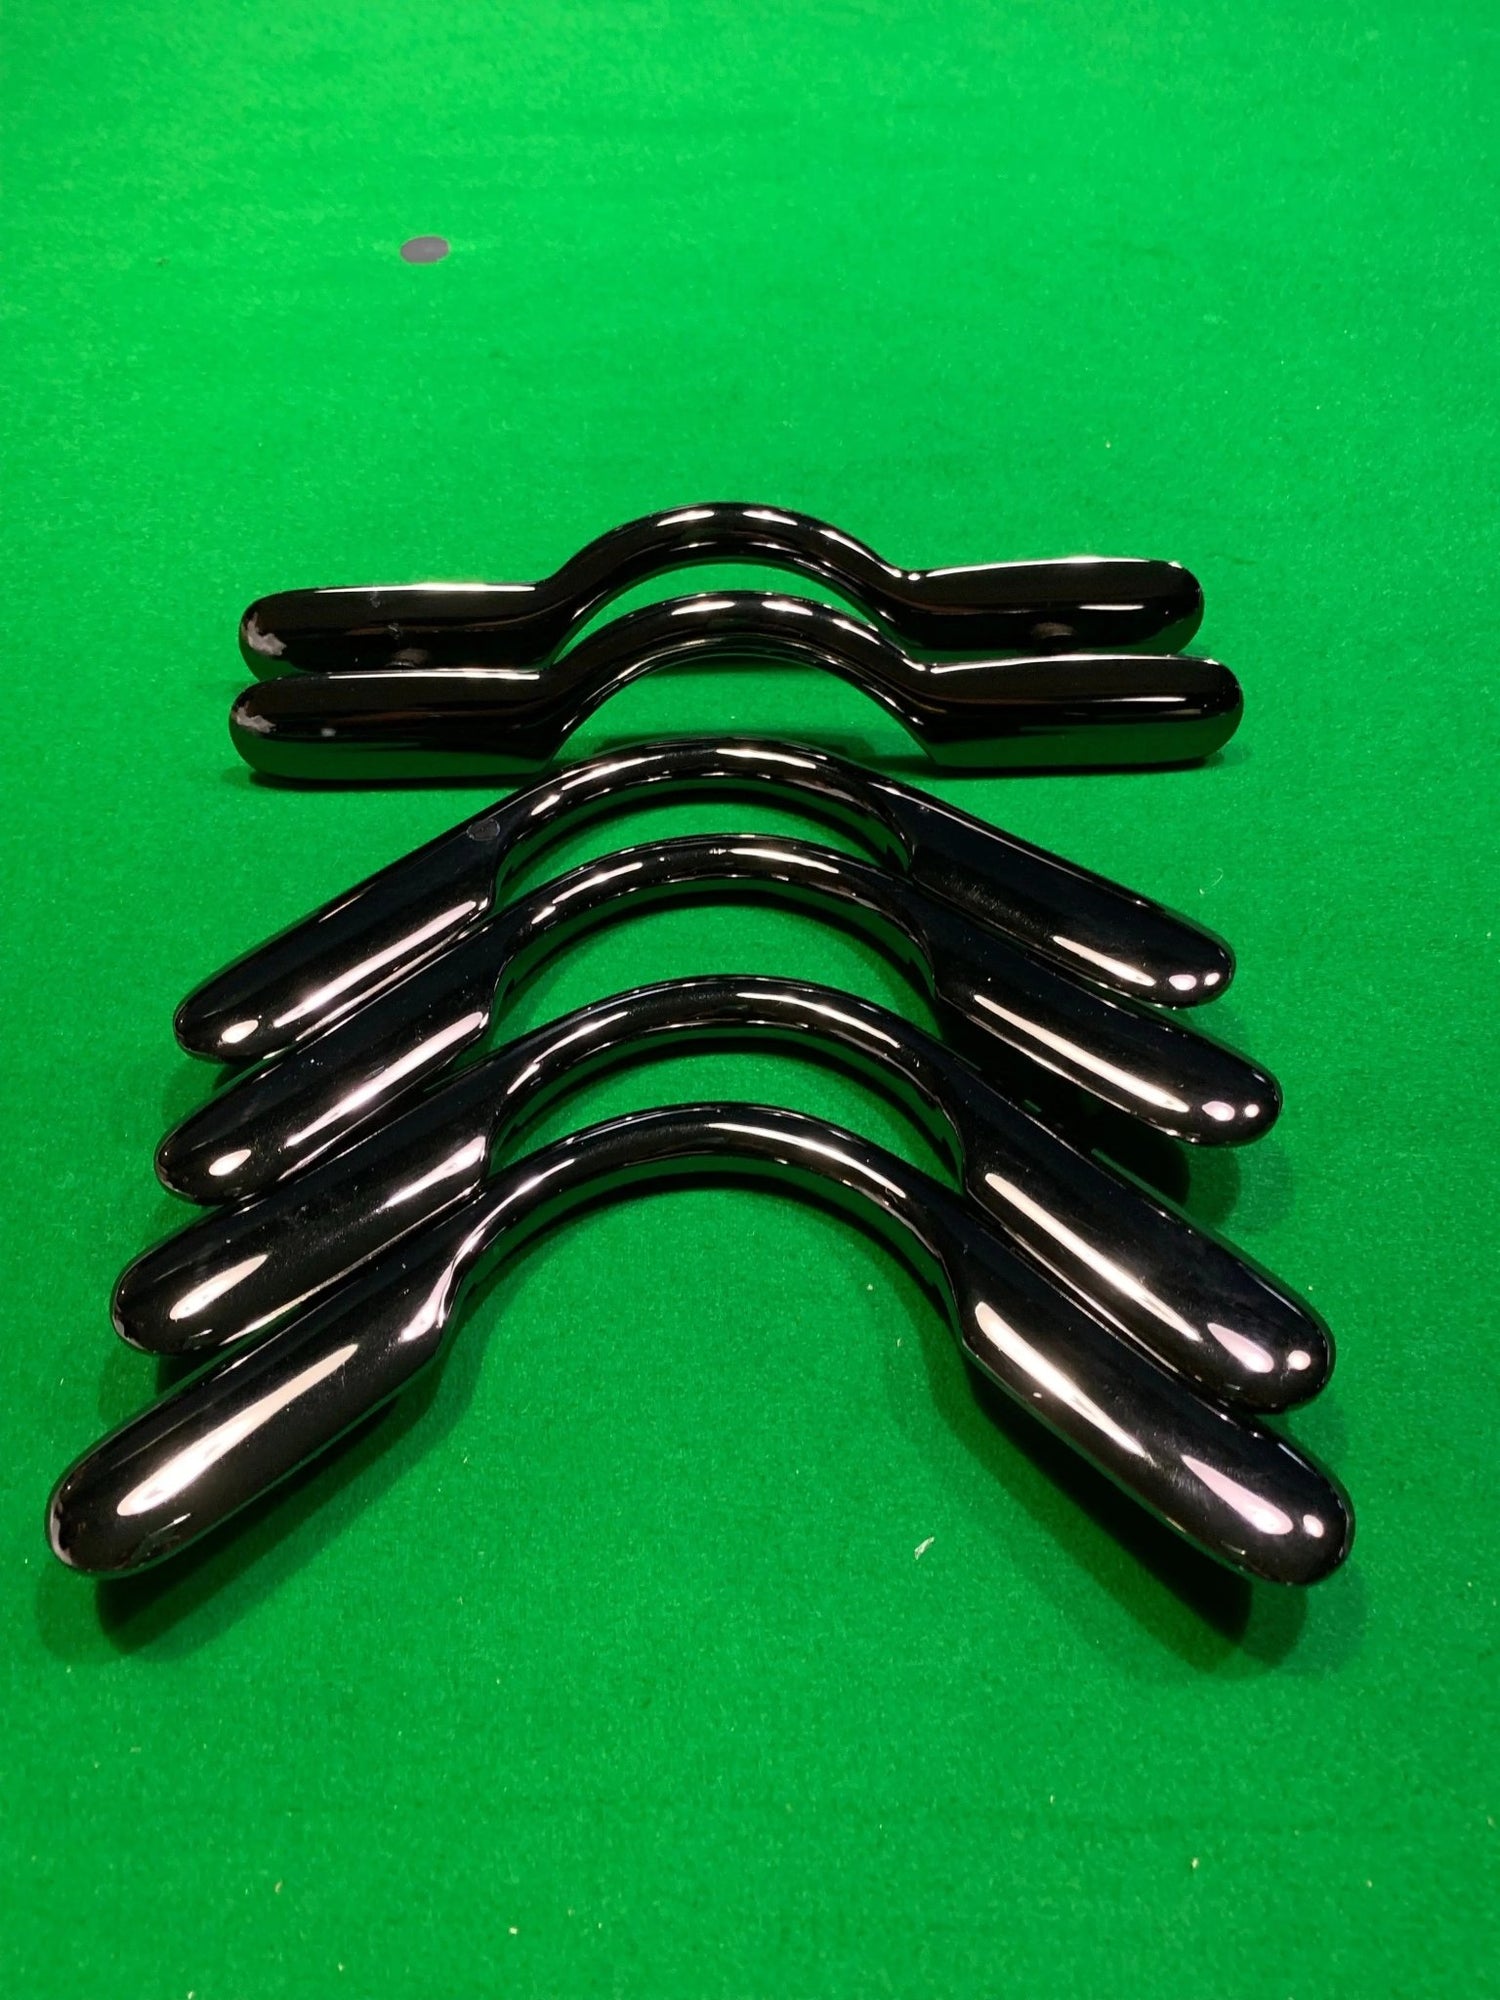 Deluxe Quality Solid Pool, Snooker, Billiard Table Pocket Brackets Heavy Boss Round - Q-Masters